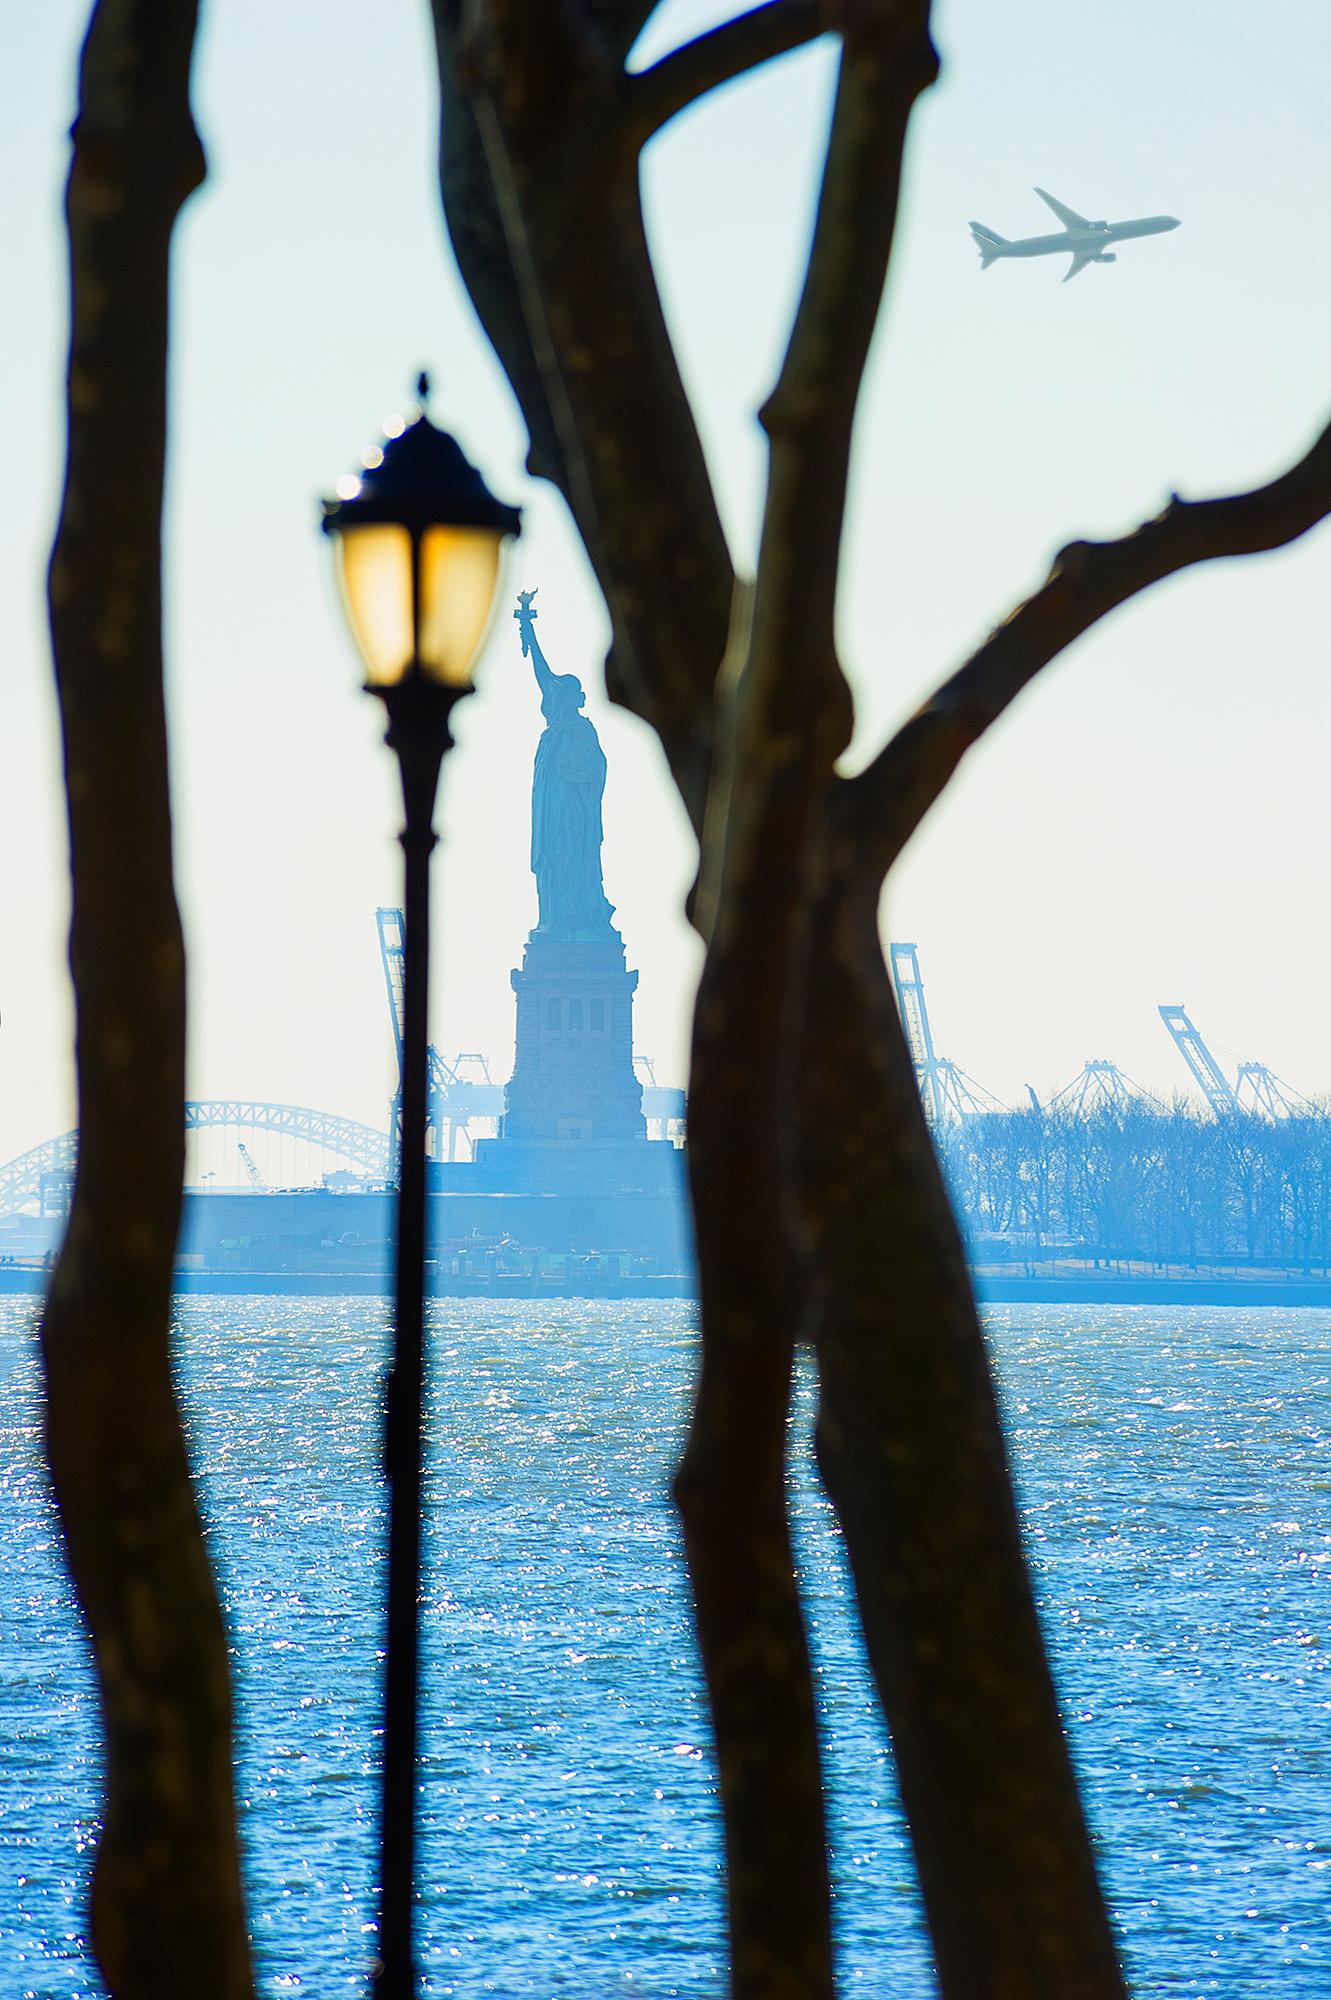 Statue Of Liberty  Framed By Trees And Streetlamp In Battery Park,  New York  - Photograph by Mitchell Funk